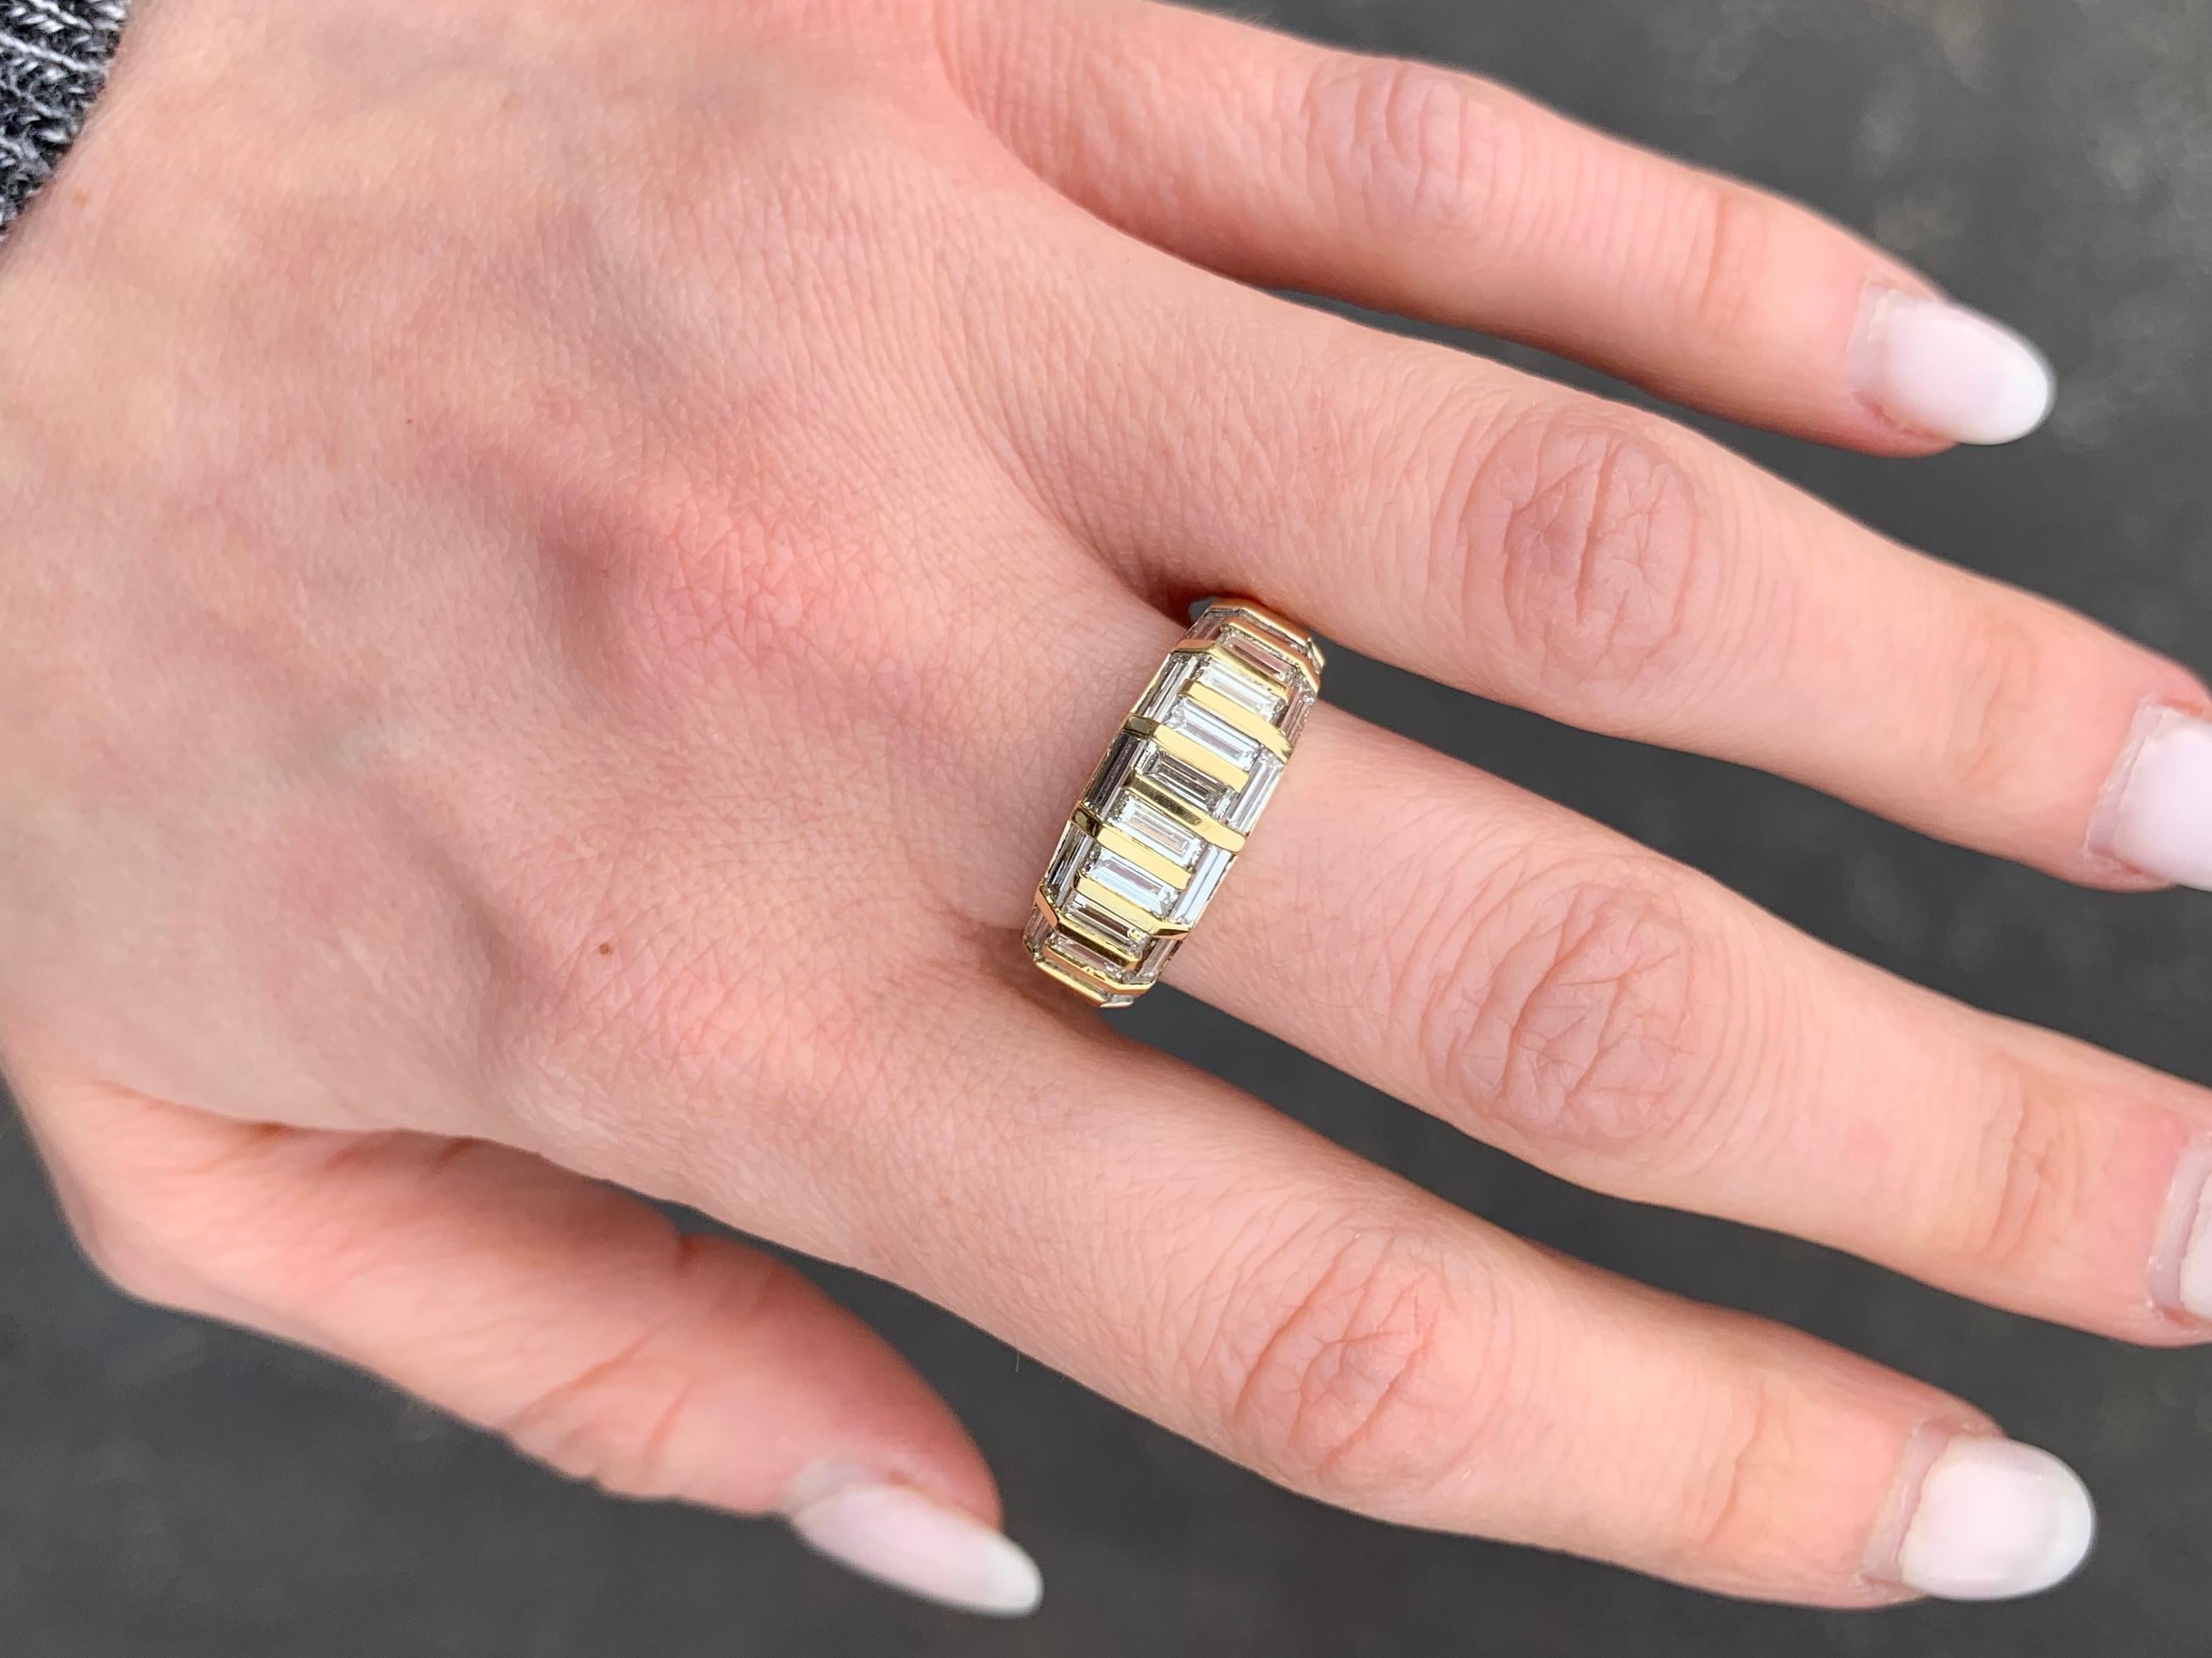 Twenty-two baguette cut diamonds are artfully arranged in a mosaic pattern with polished 18k gold gold bars further accenting the surface. Ring has a total diamond carat weight of 2.10 carats at approximately H color, VS2 clarity. Width of ring